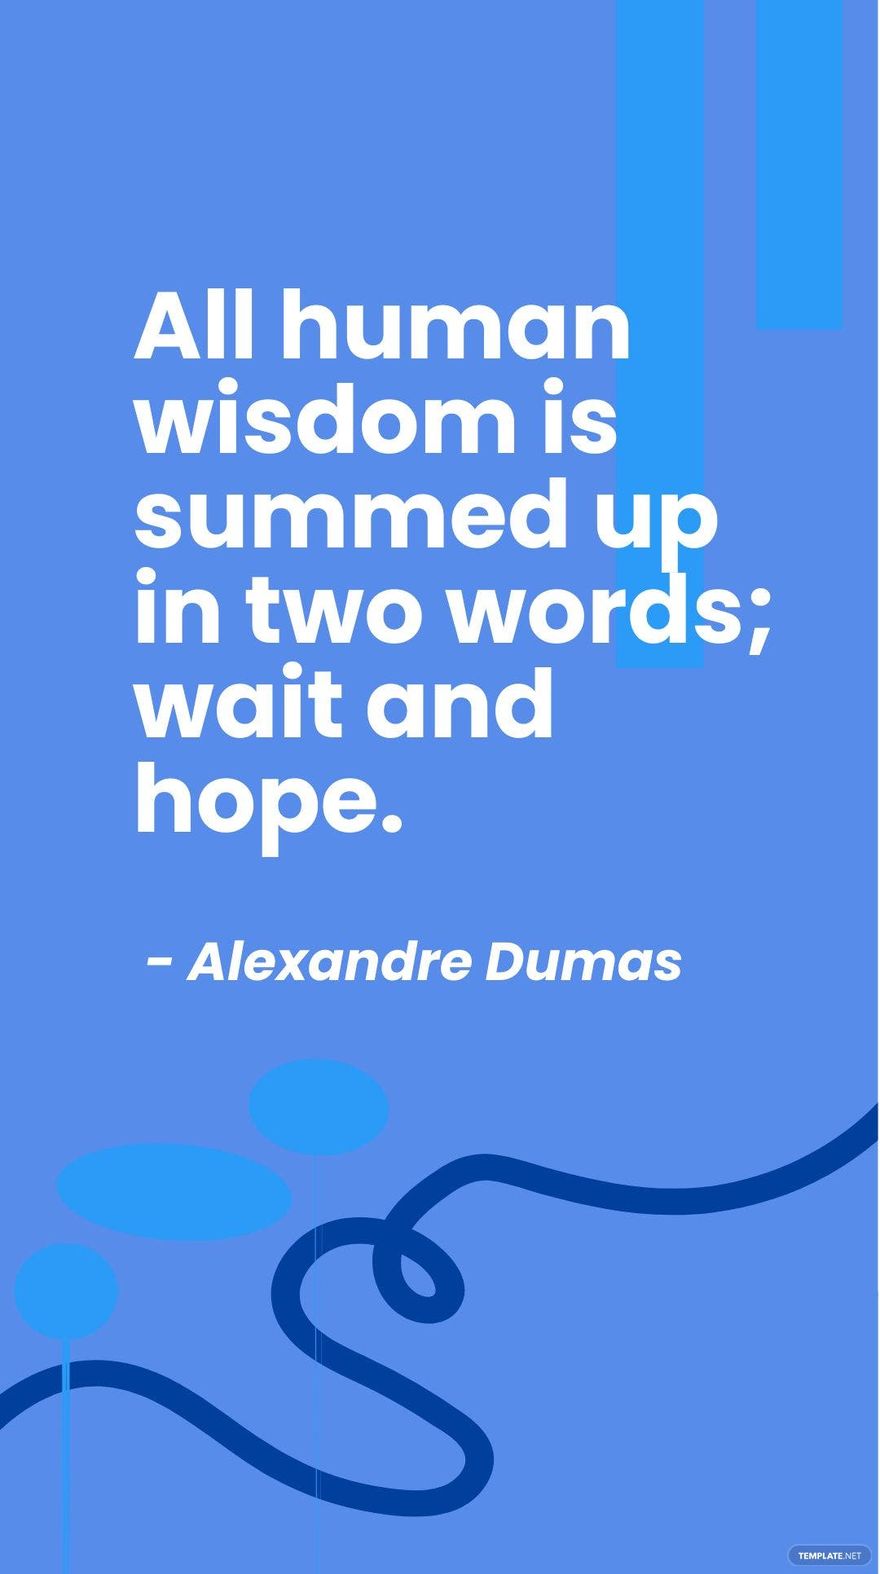 Free Alexandre Dumas - All human wisdom is summed up in two words; wait and hope. in JPG